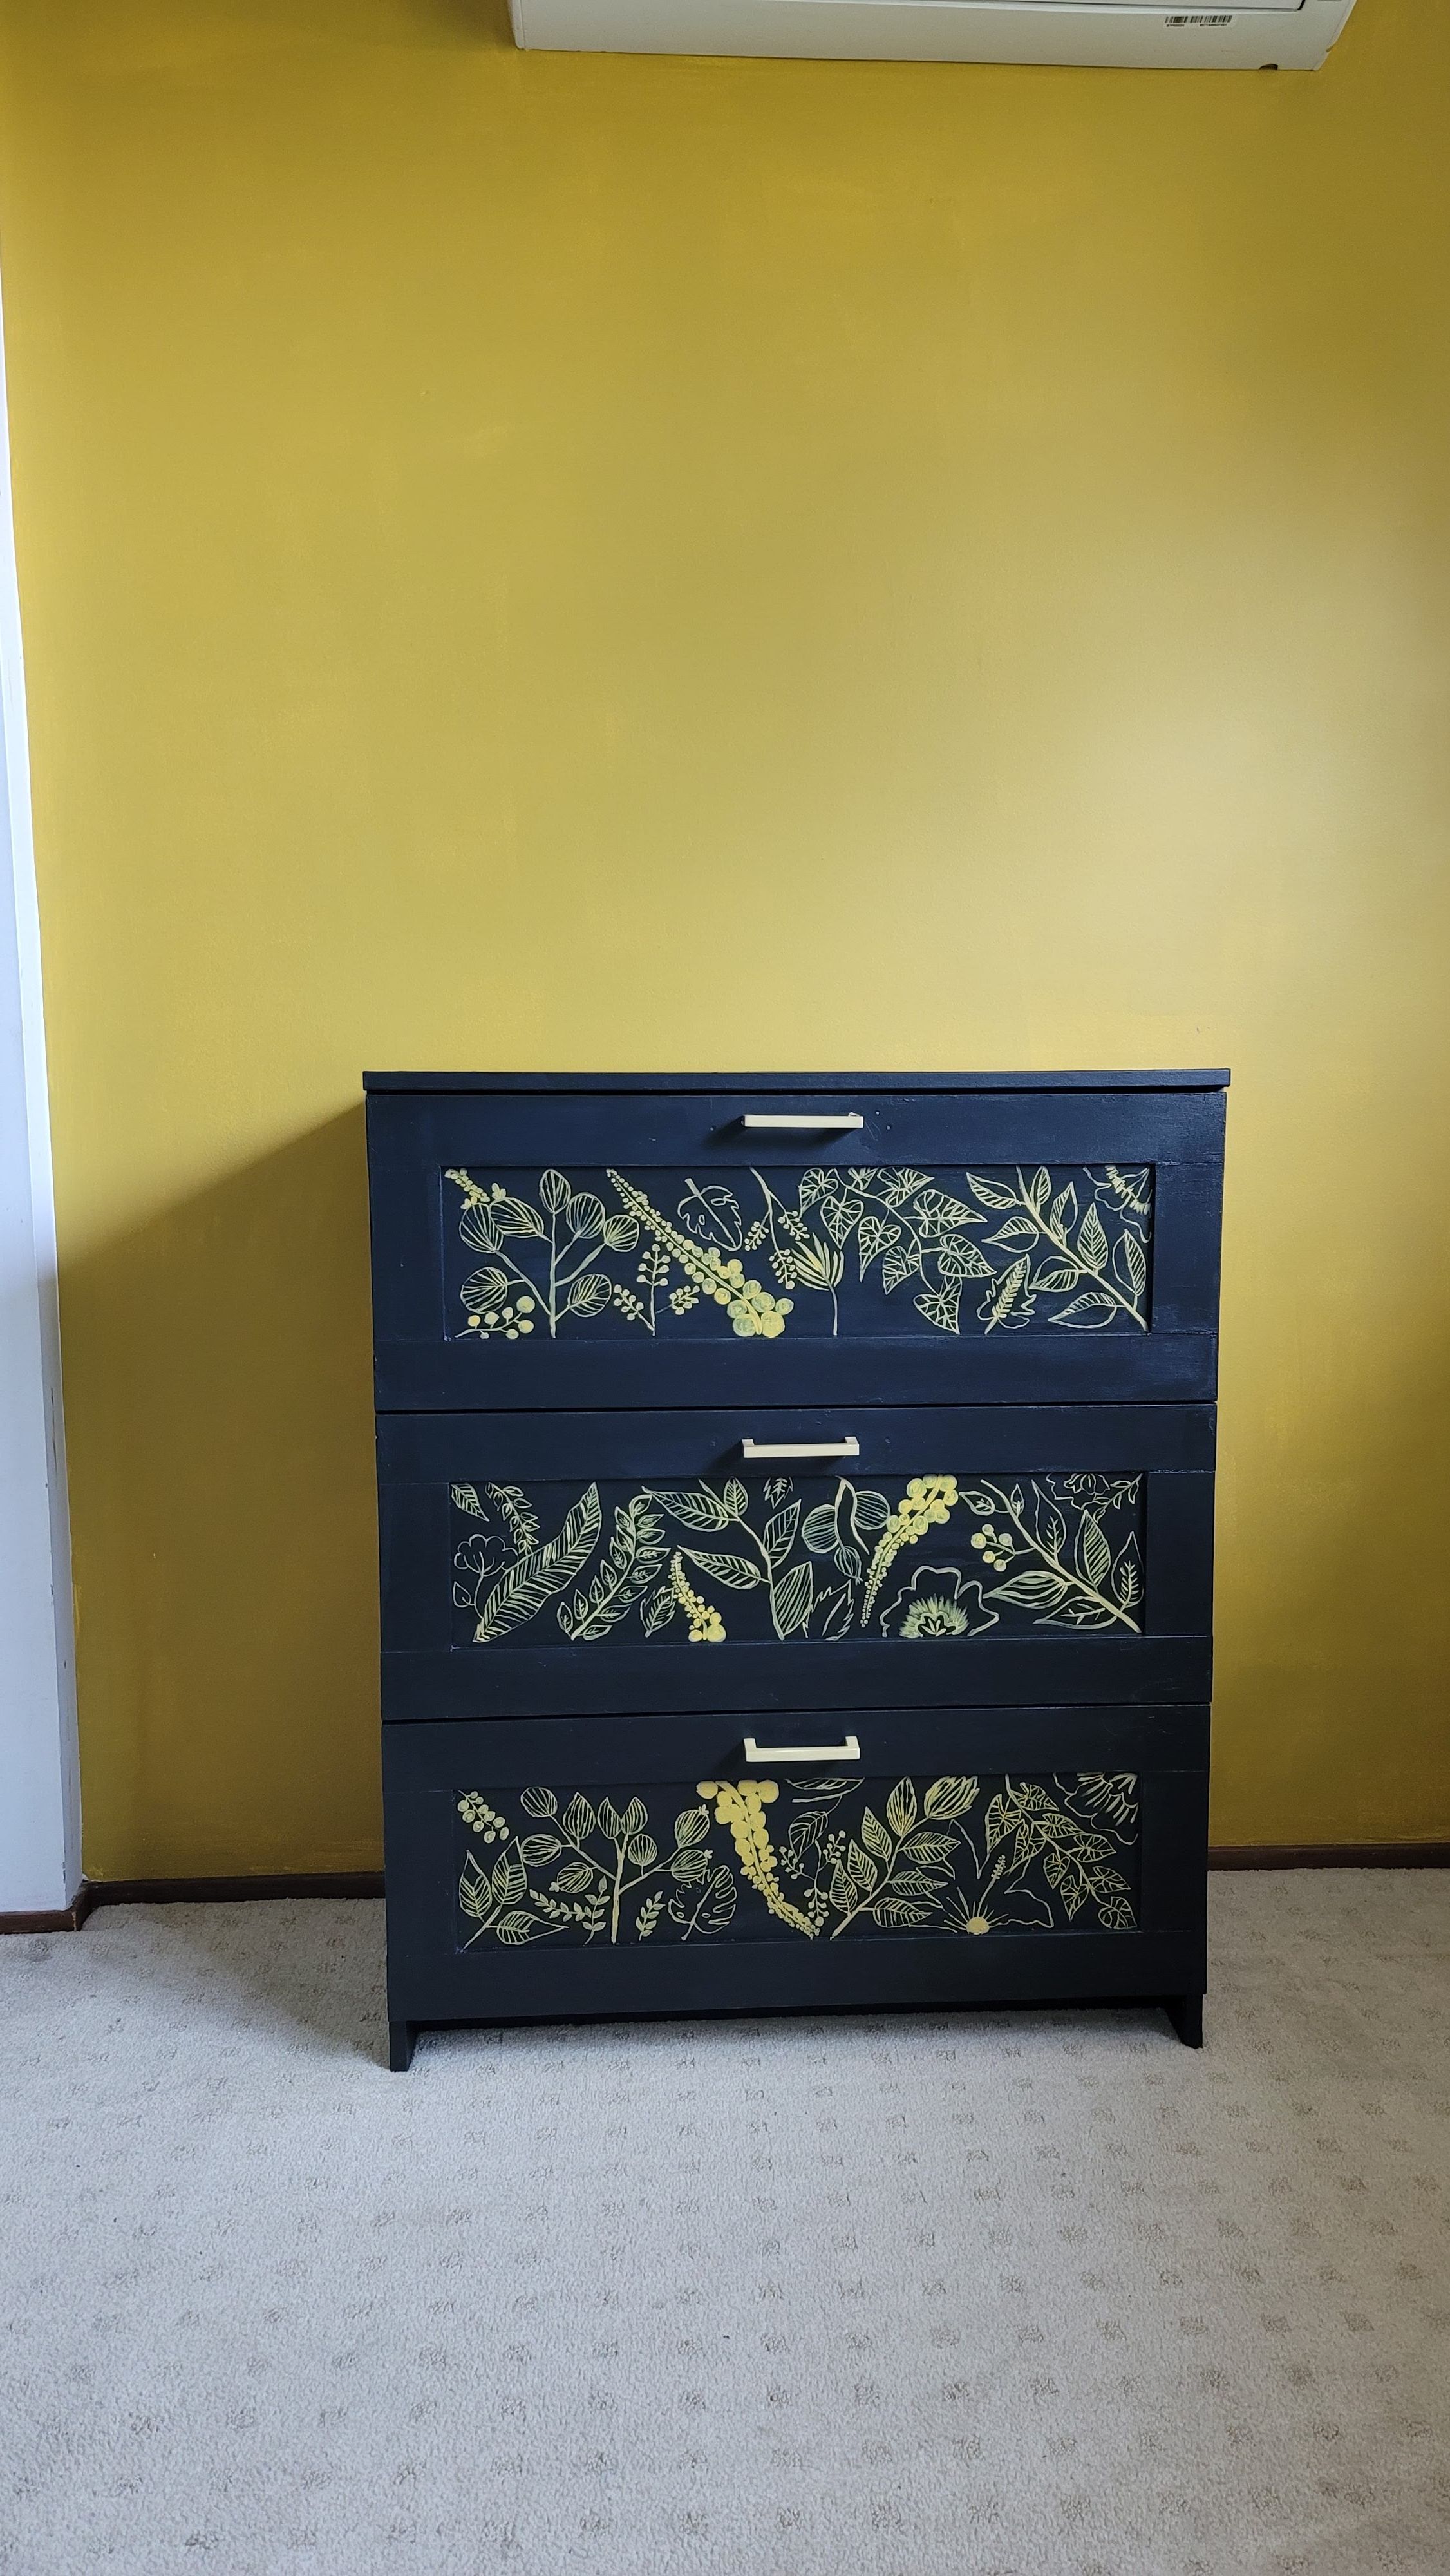 Chest of drawers makeover | Bunnings Workshop community